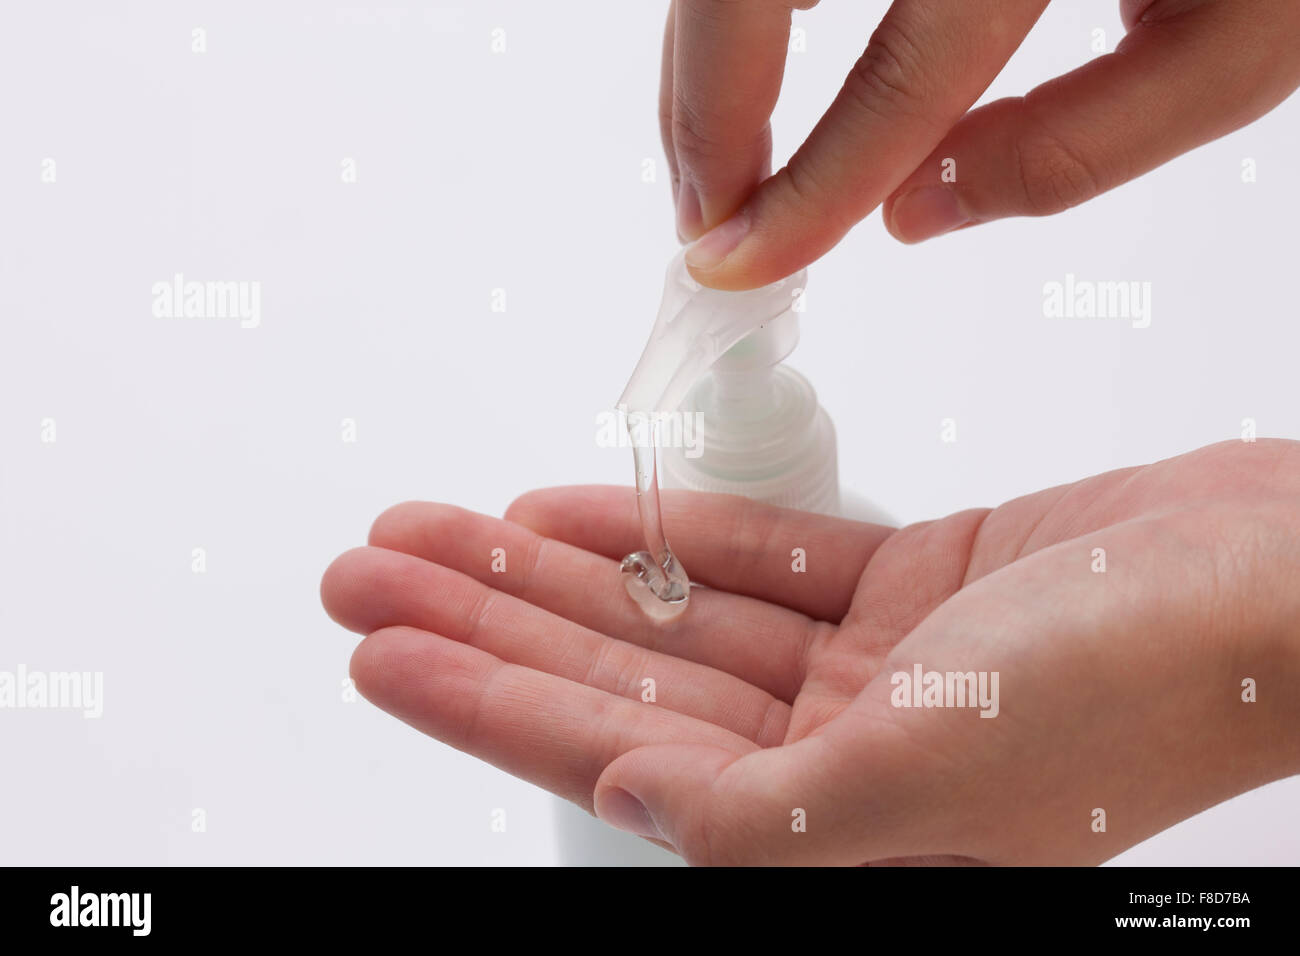 Hand sanitizer being pushed and some liquids coming out from it to a hand Stock Photo